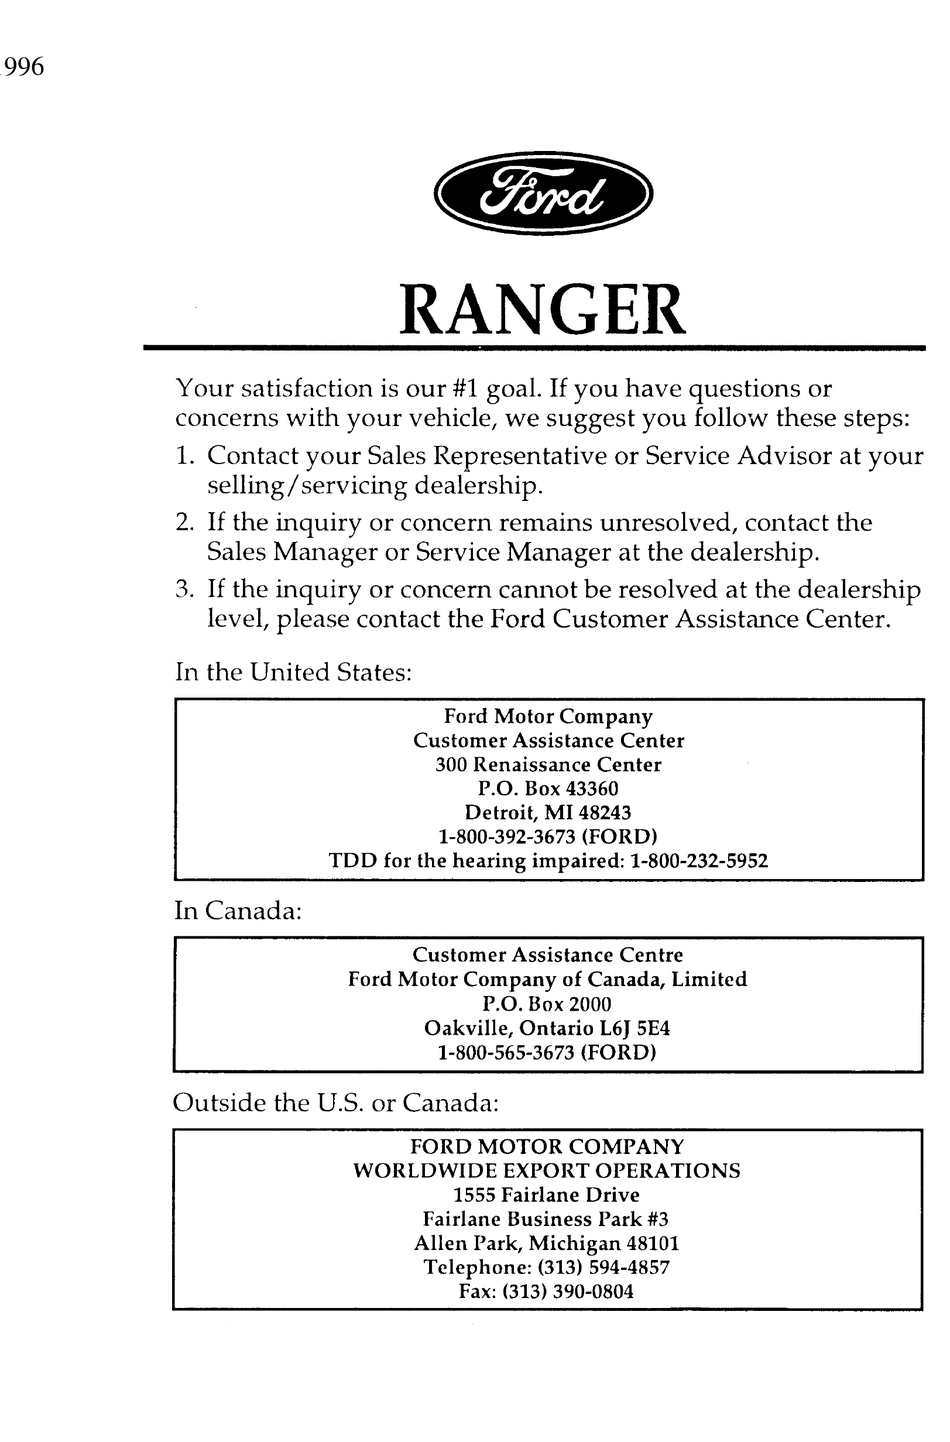 1992 Ford Ranger Owners Manual User Guide Reference Operator Book Fuses Fluids 